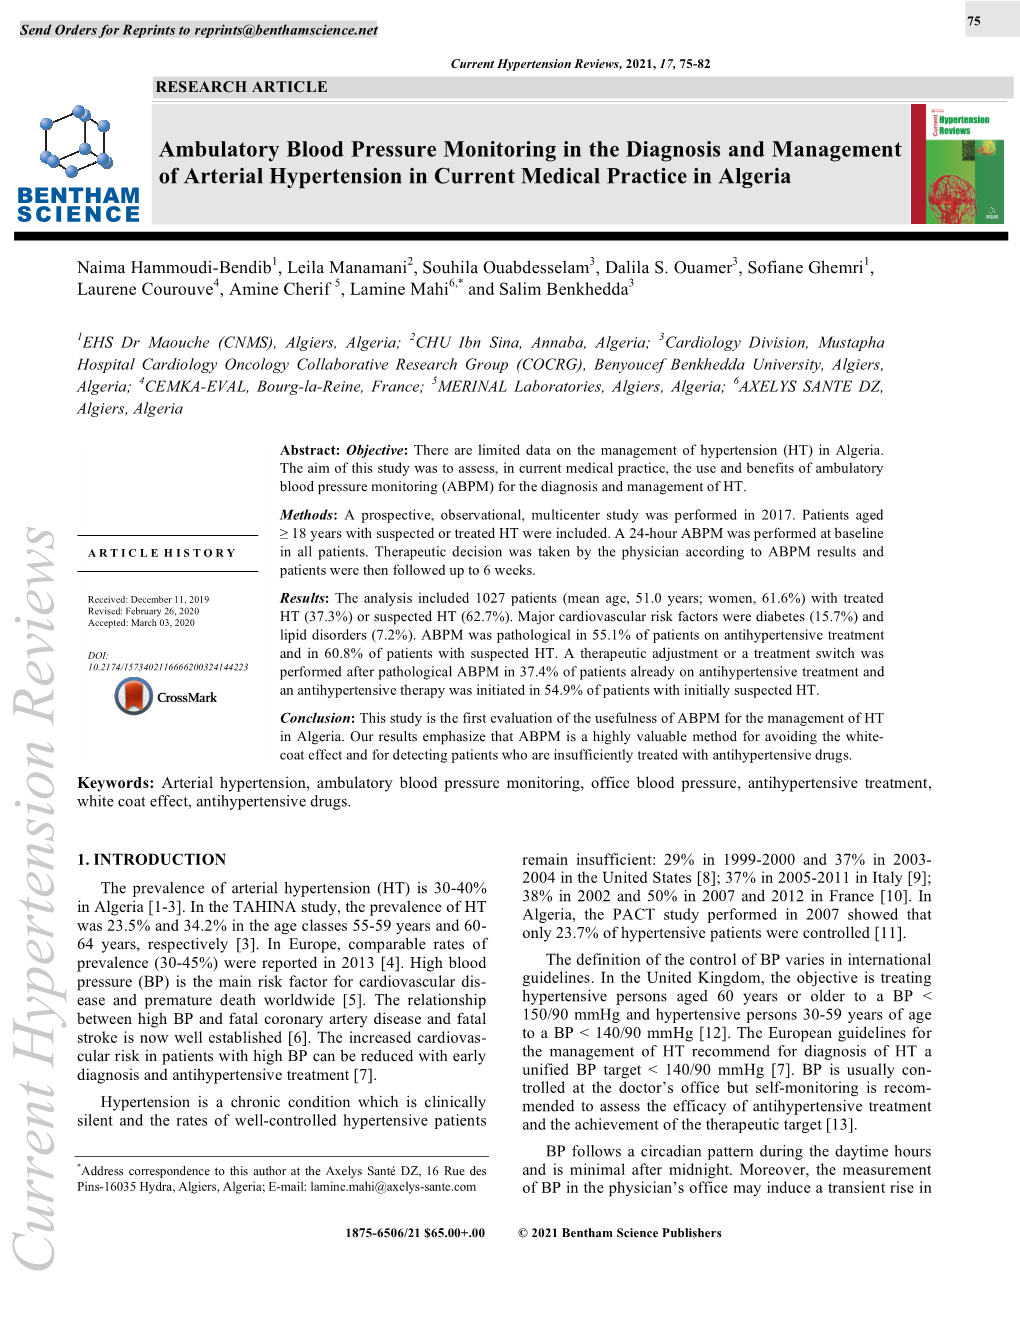 Ambulatory Blood Pressure Monitoring in the Diagnosis and Management of Arterial Hypertension in Current Medical Practice in Algeria